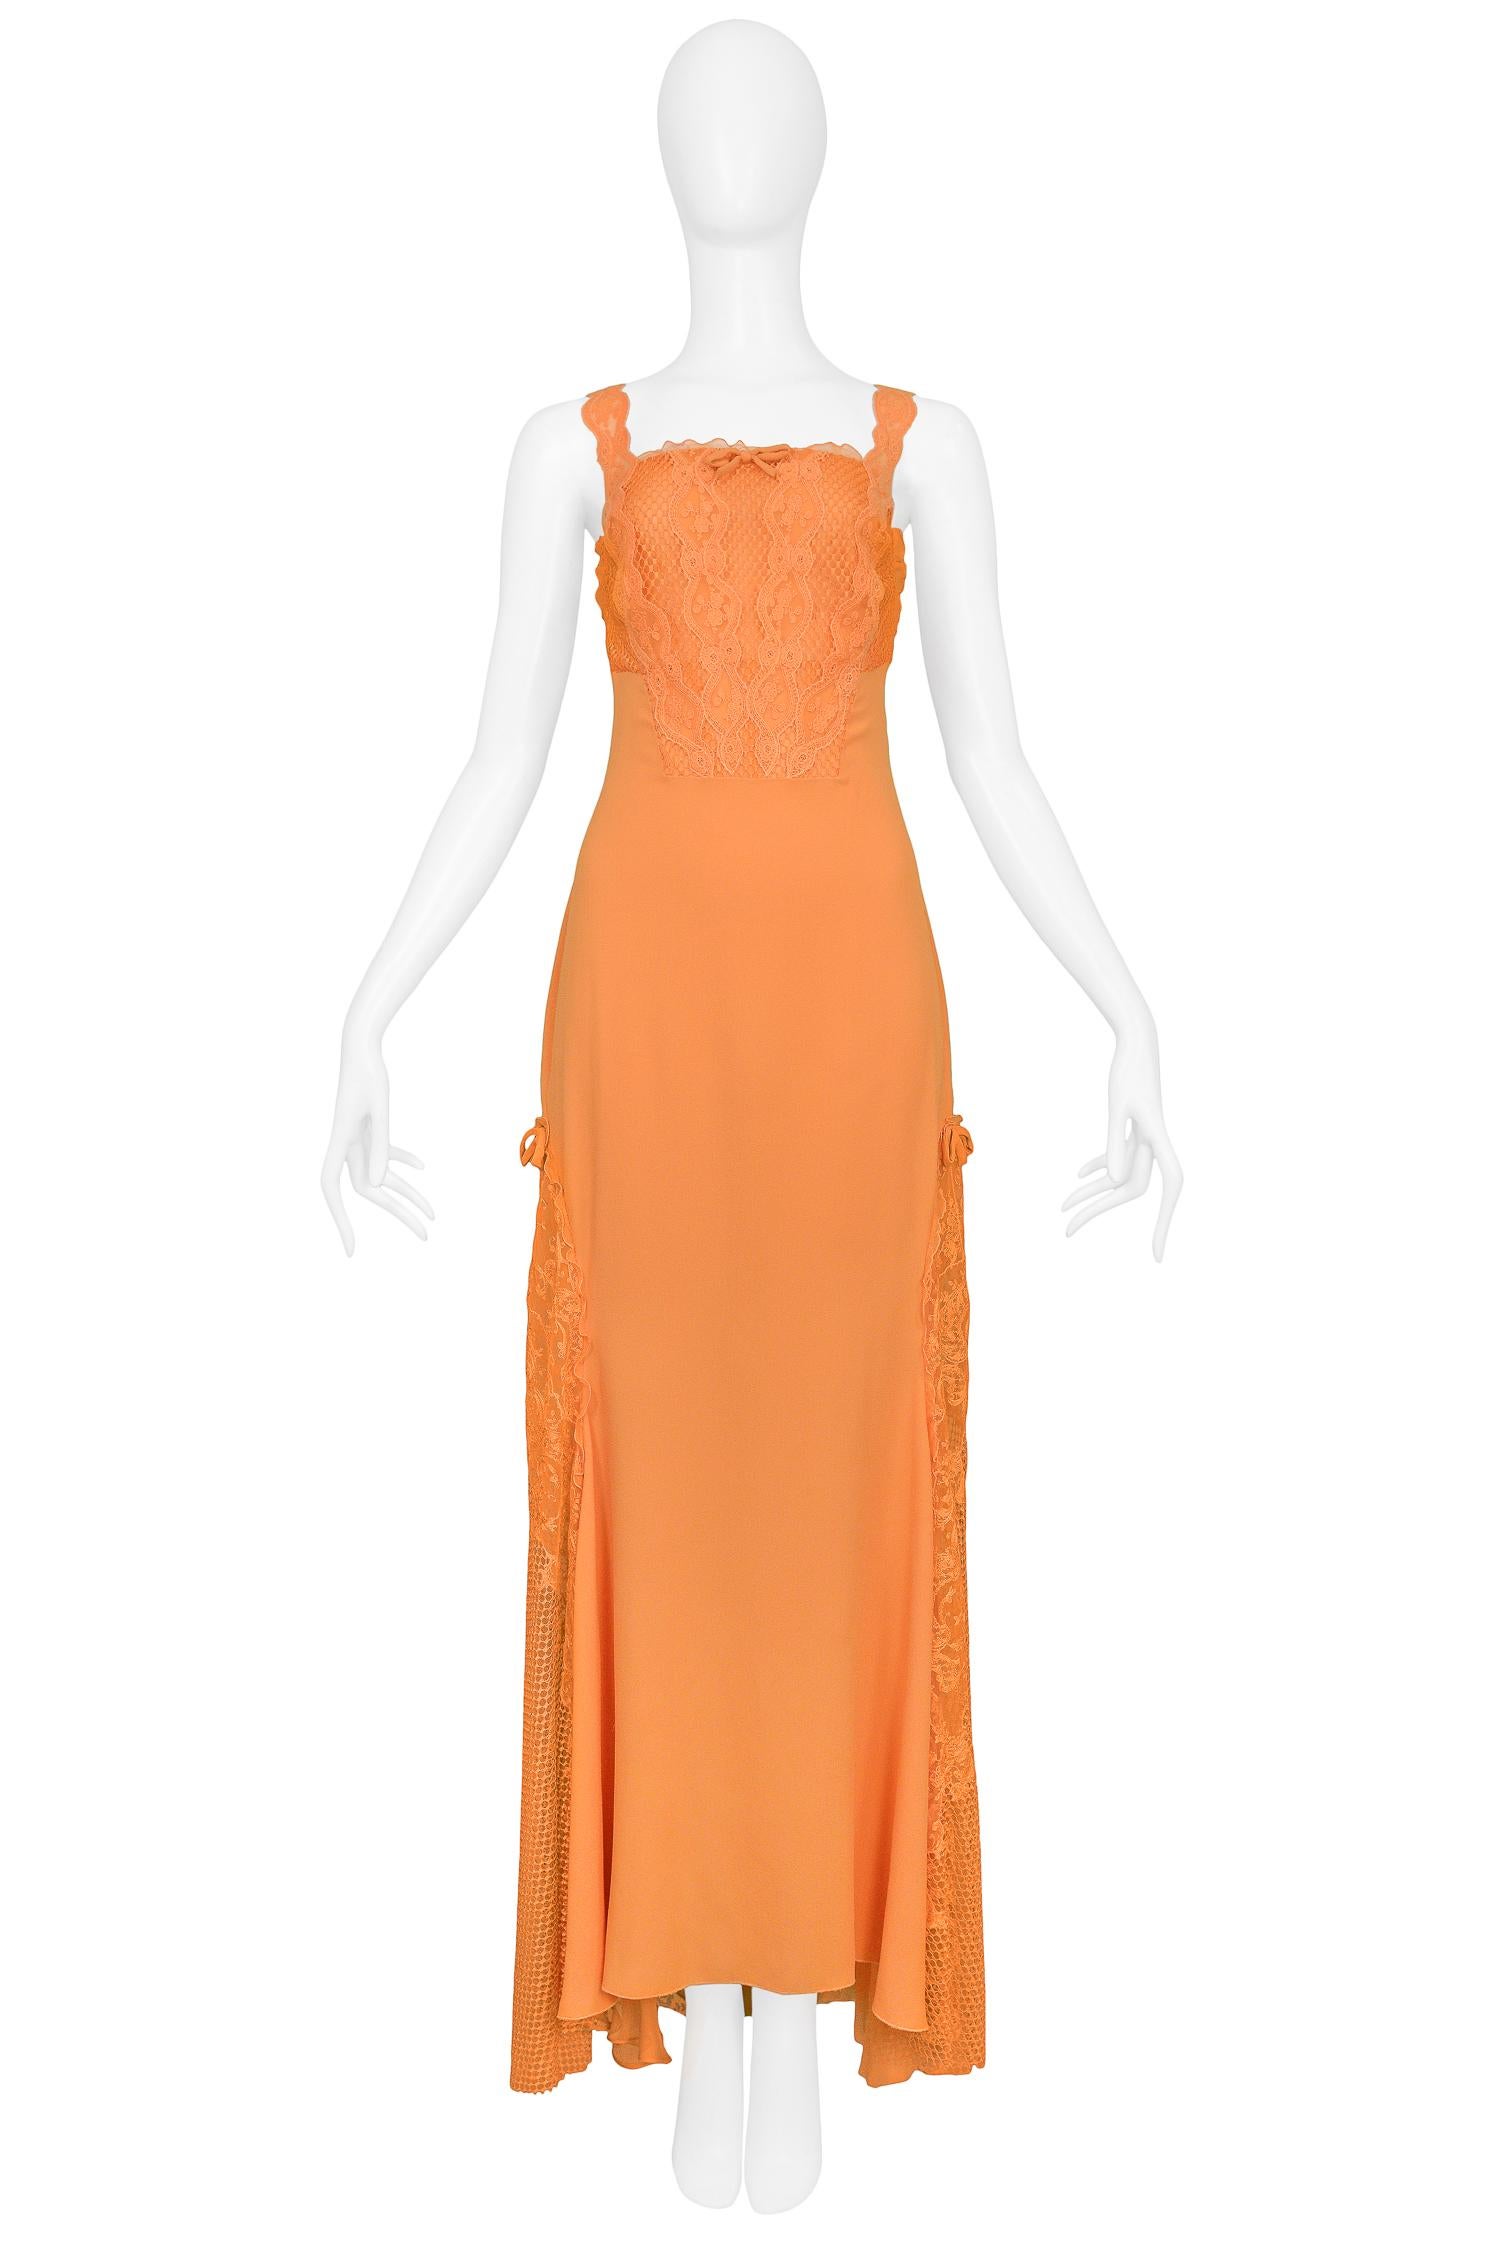 Vintage Gianni Versace apricot orange silk evening gown with lace & net inserts. The gown features bow detailing and rhinestone embellished emblems at straps. Runway piece from the Spring/Summer 1997 Collection.

Excellent Vintage Condition.

Size: